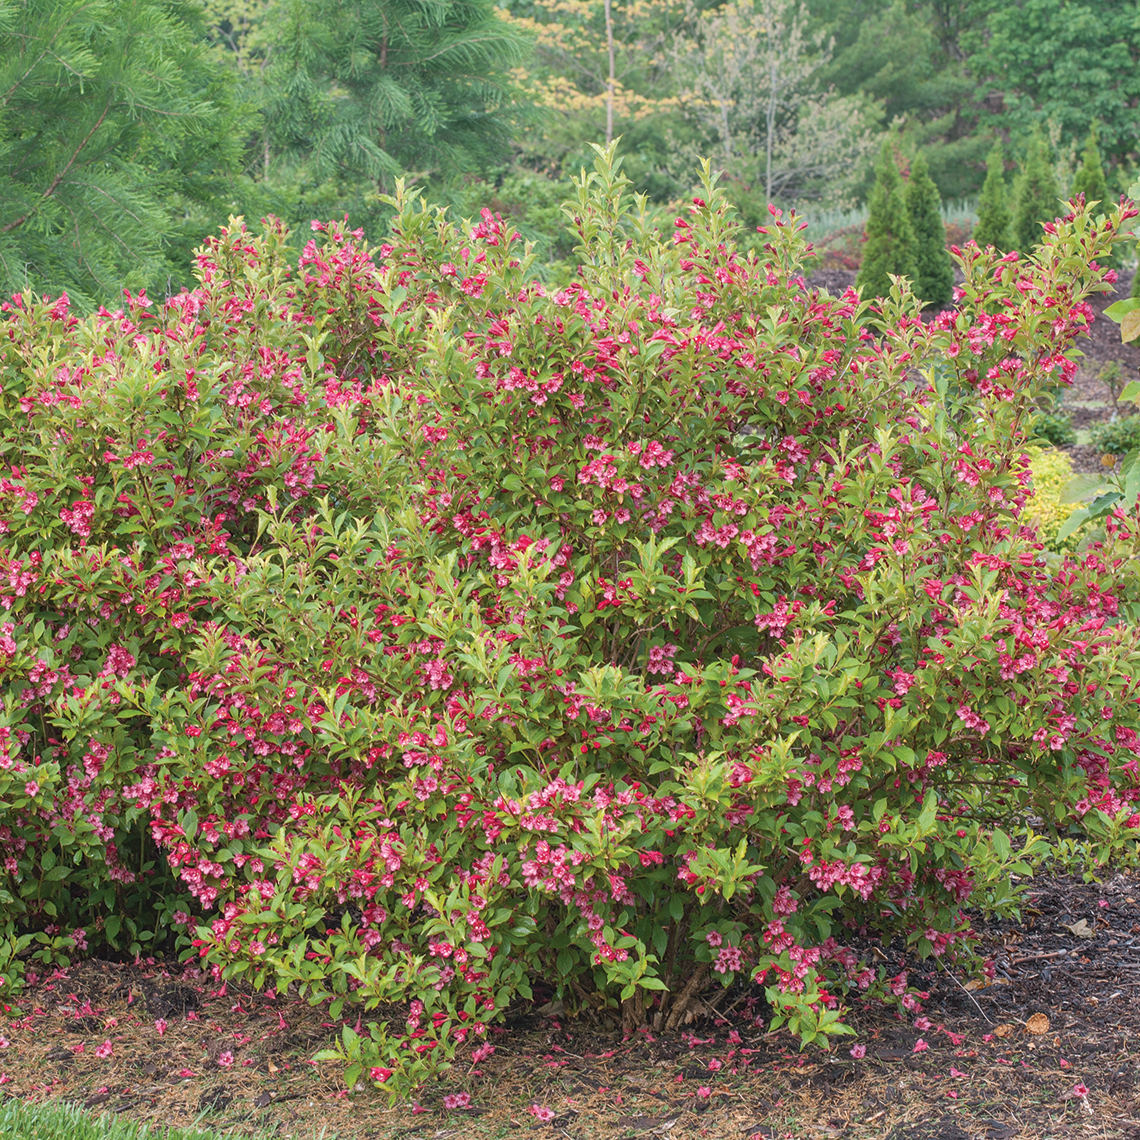 Sonic Bloom Ghost weigela blooming in the landscape showing a stark contrast between the red flowers and chartreuse foliage